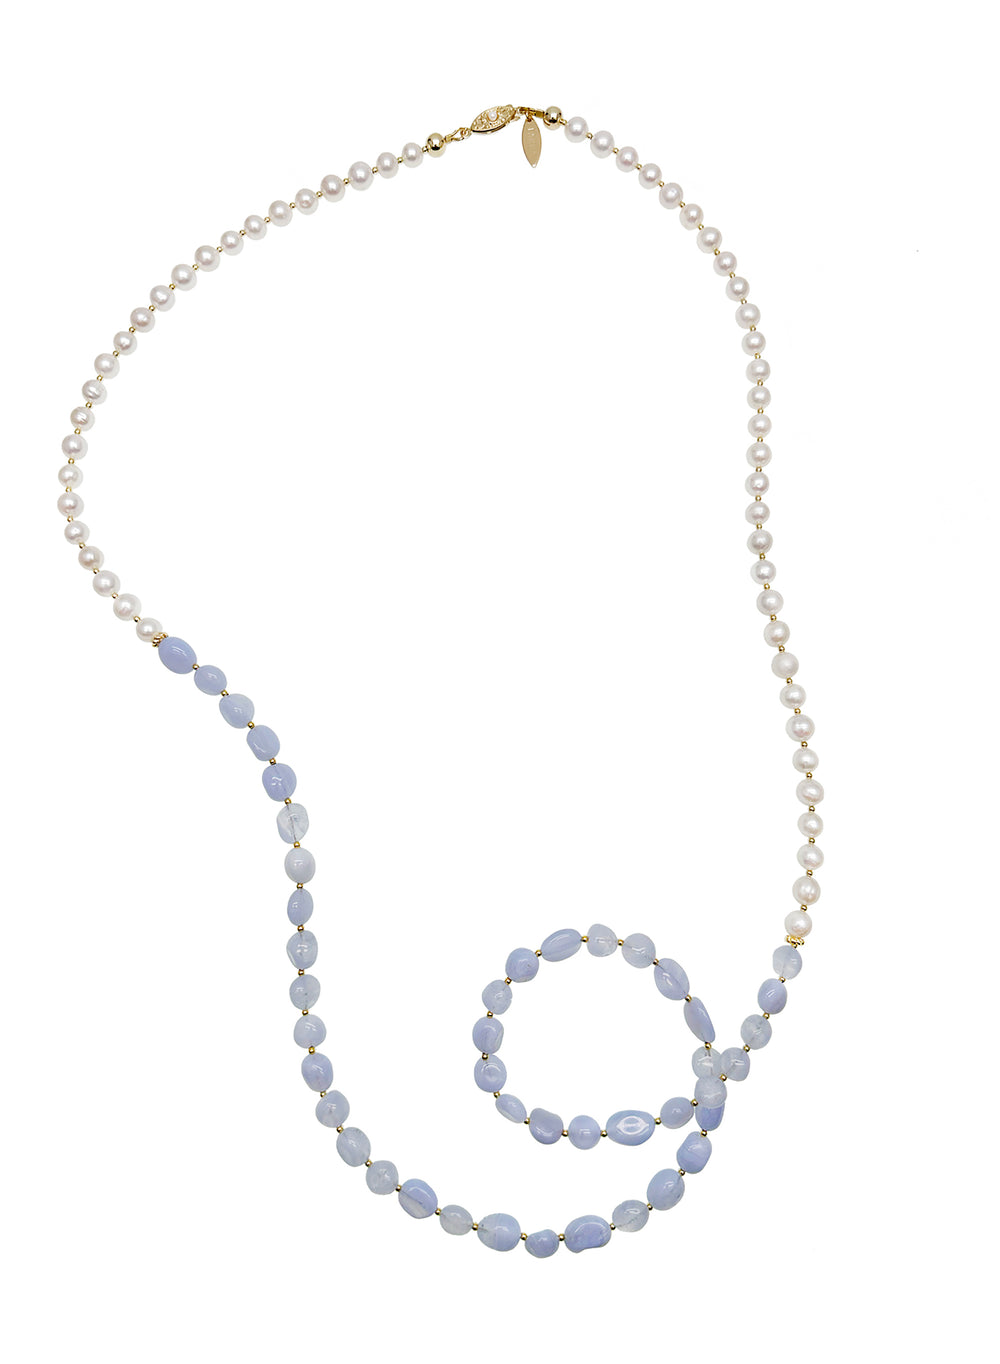 White Freshwater Pearls and Blue Lace Agate Long Necklace JN031 - FARRA